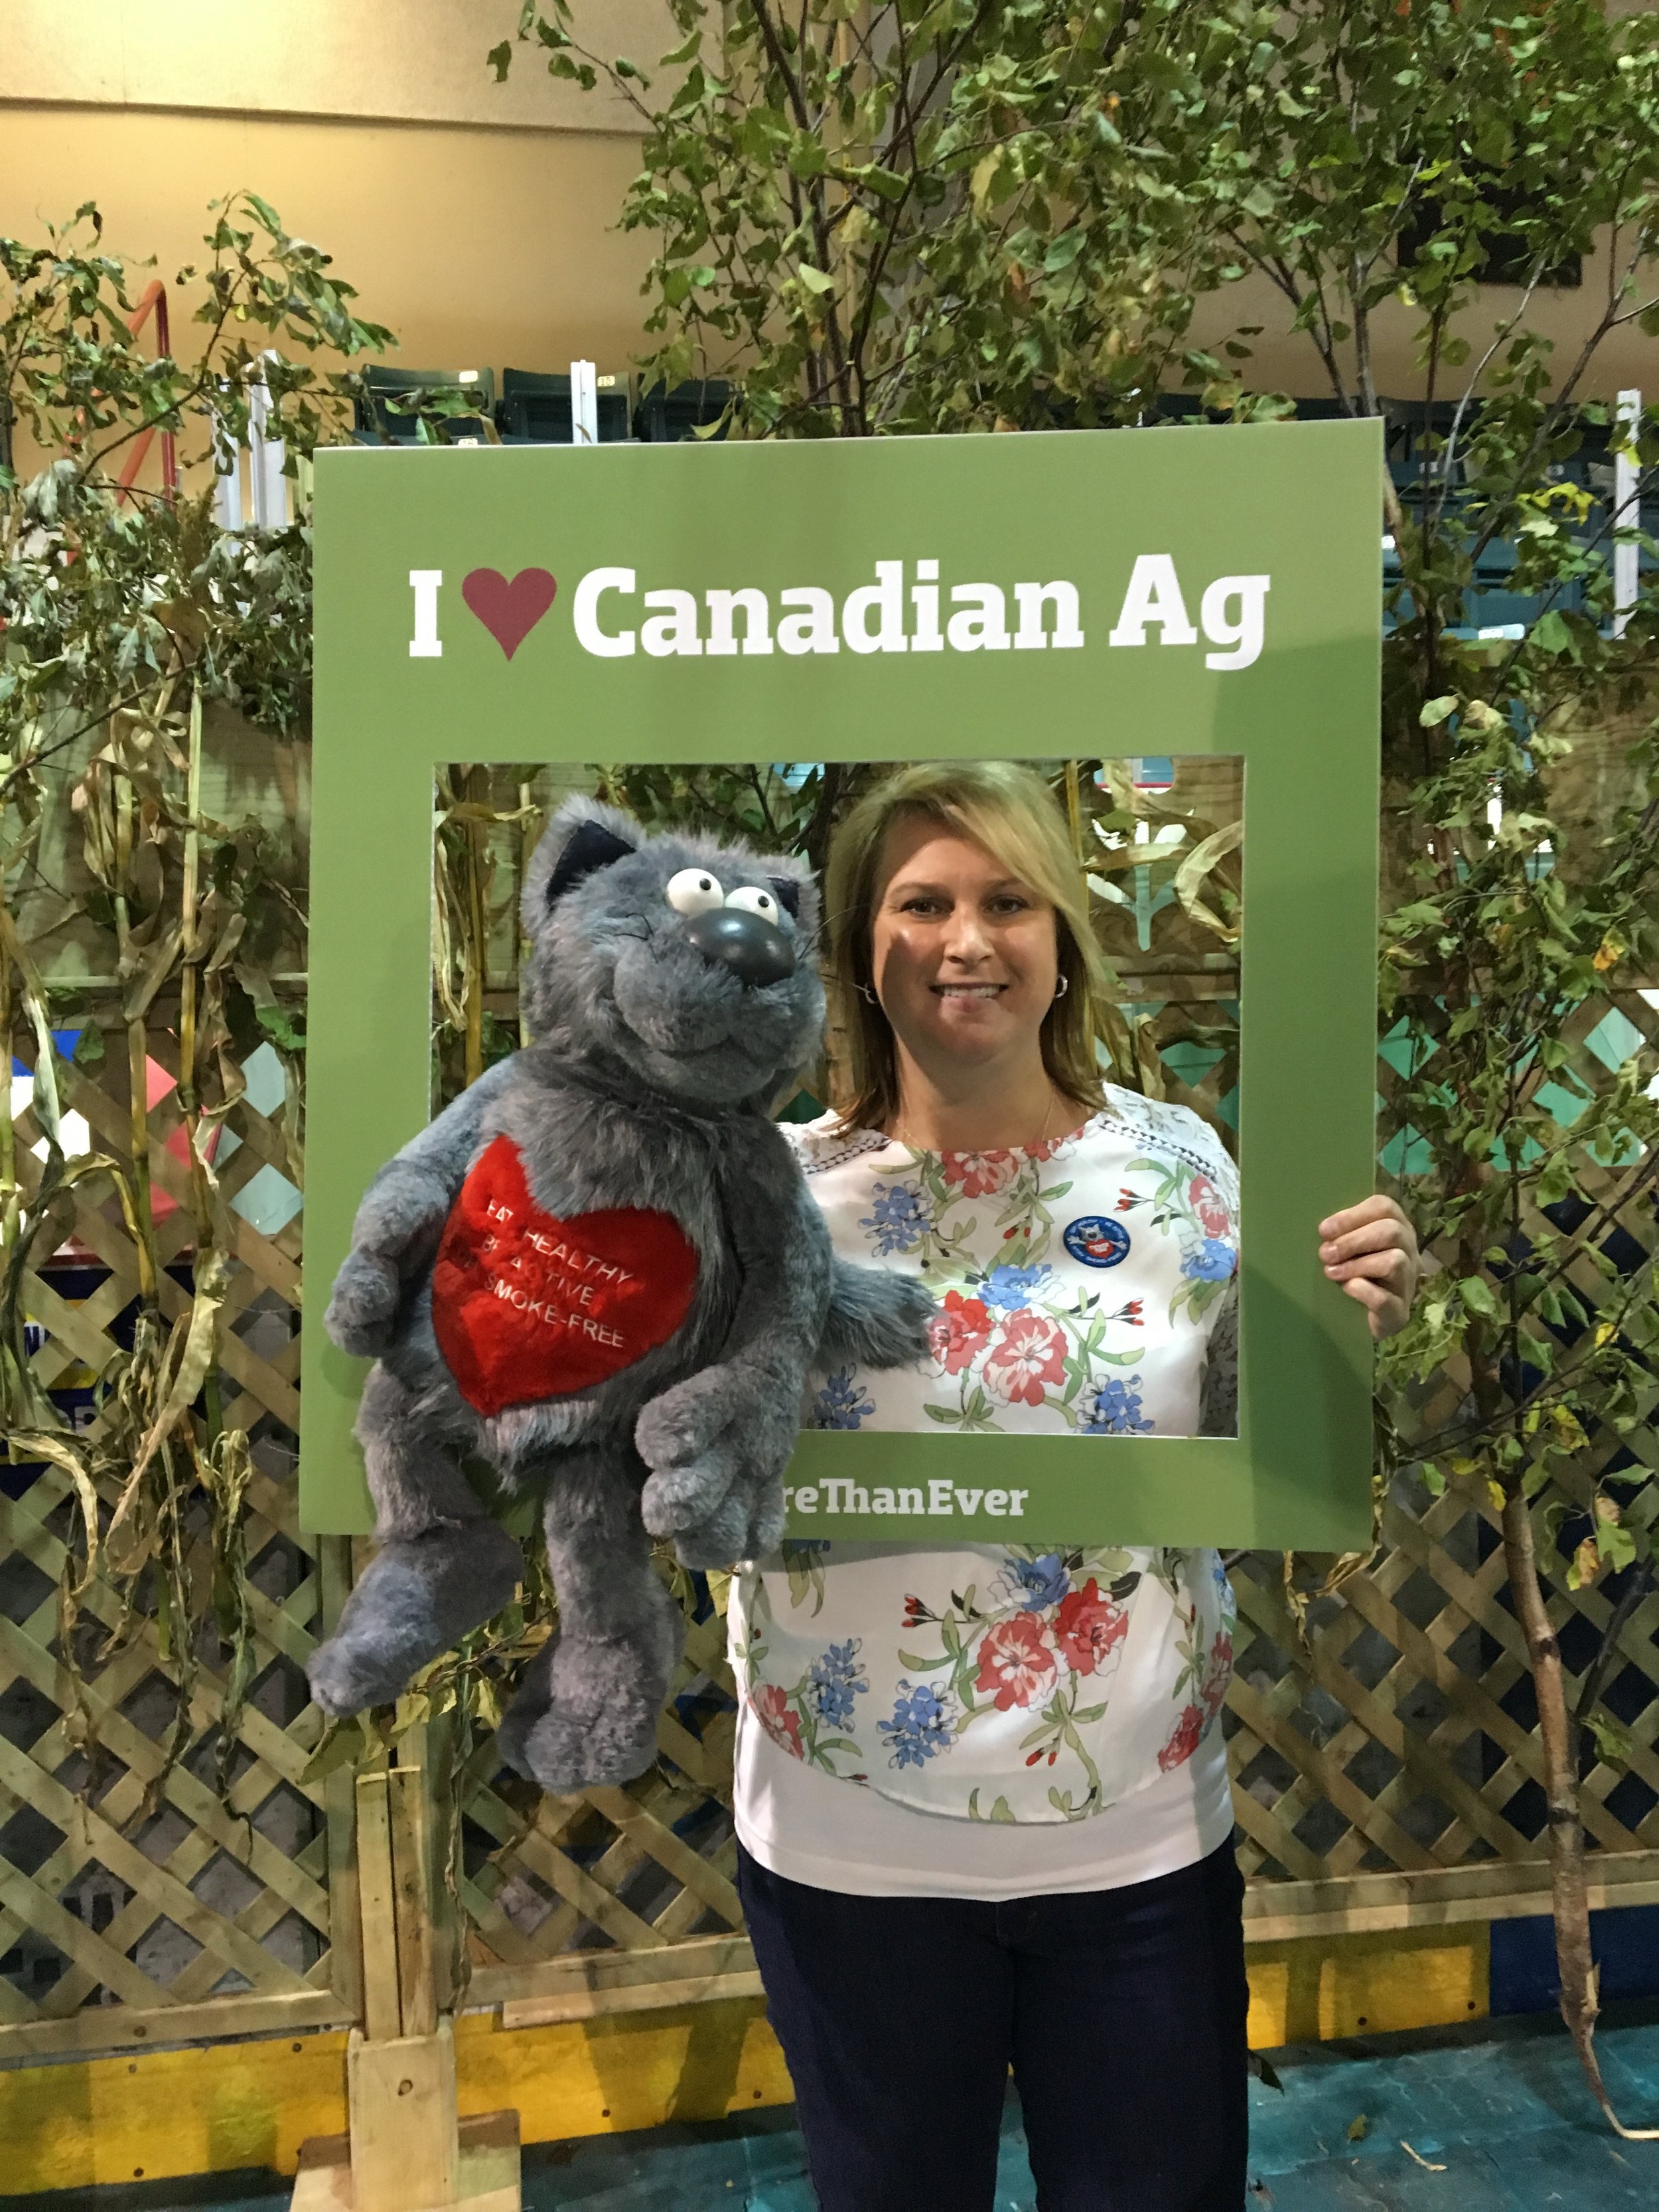 jill with Ticker at Ag event.jpg